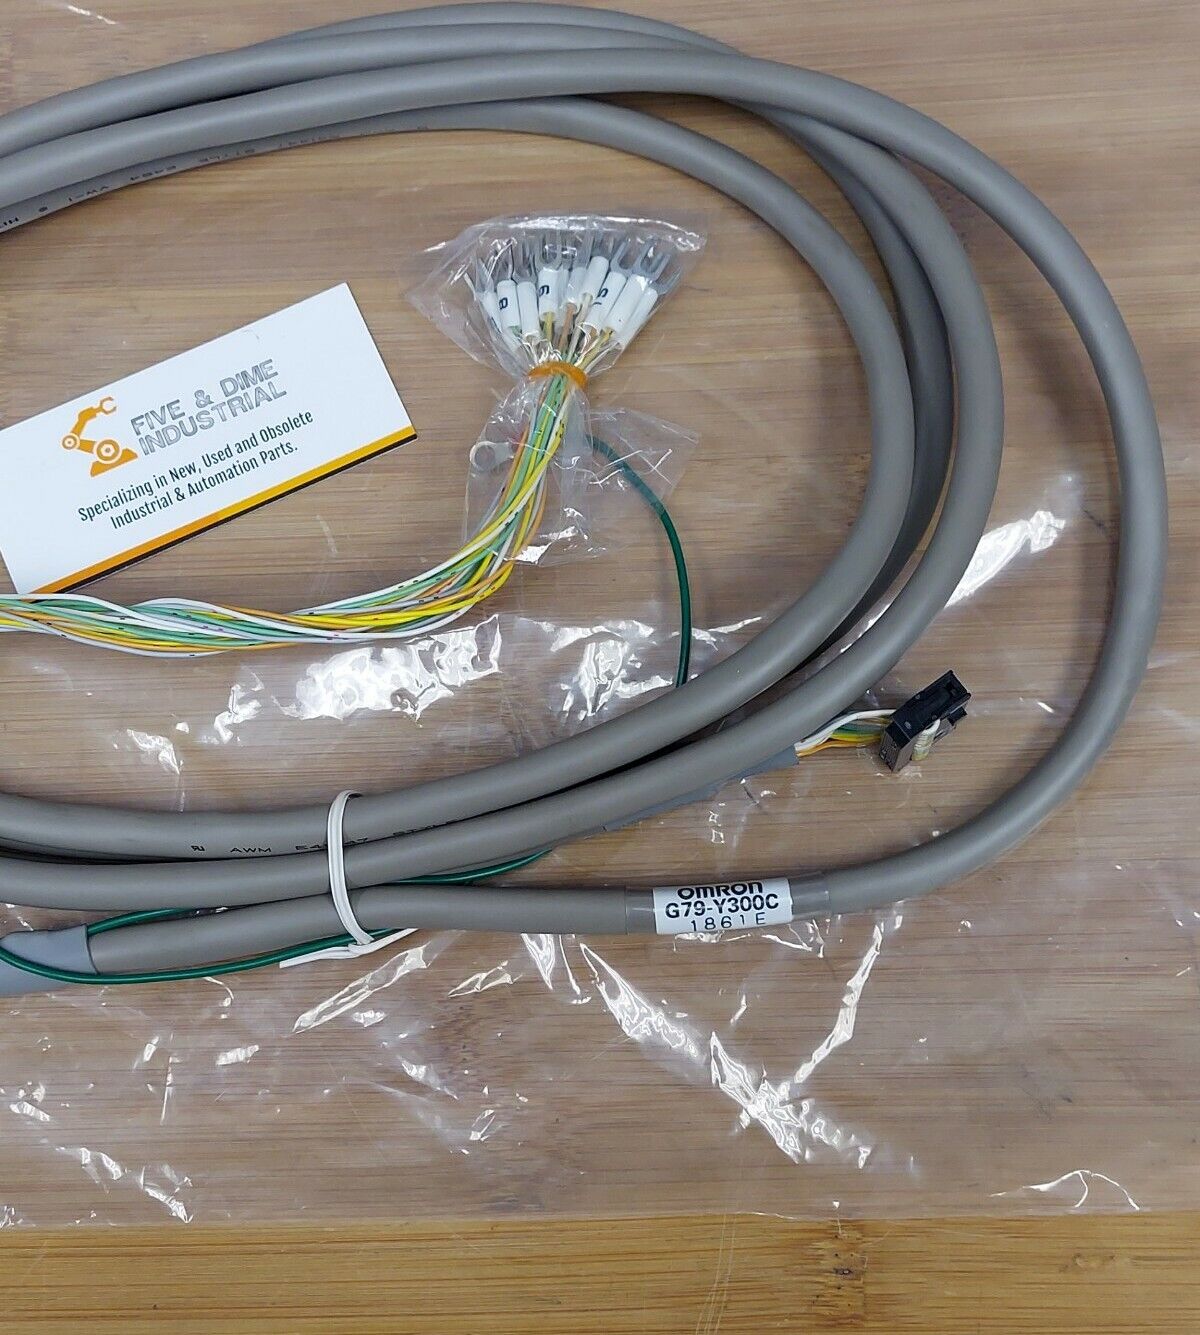 OMRON G79-Y300C 7 New Segment Connecting Cable / Cordset (CBL101)